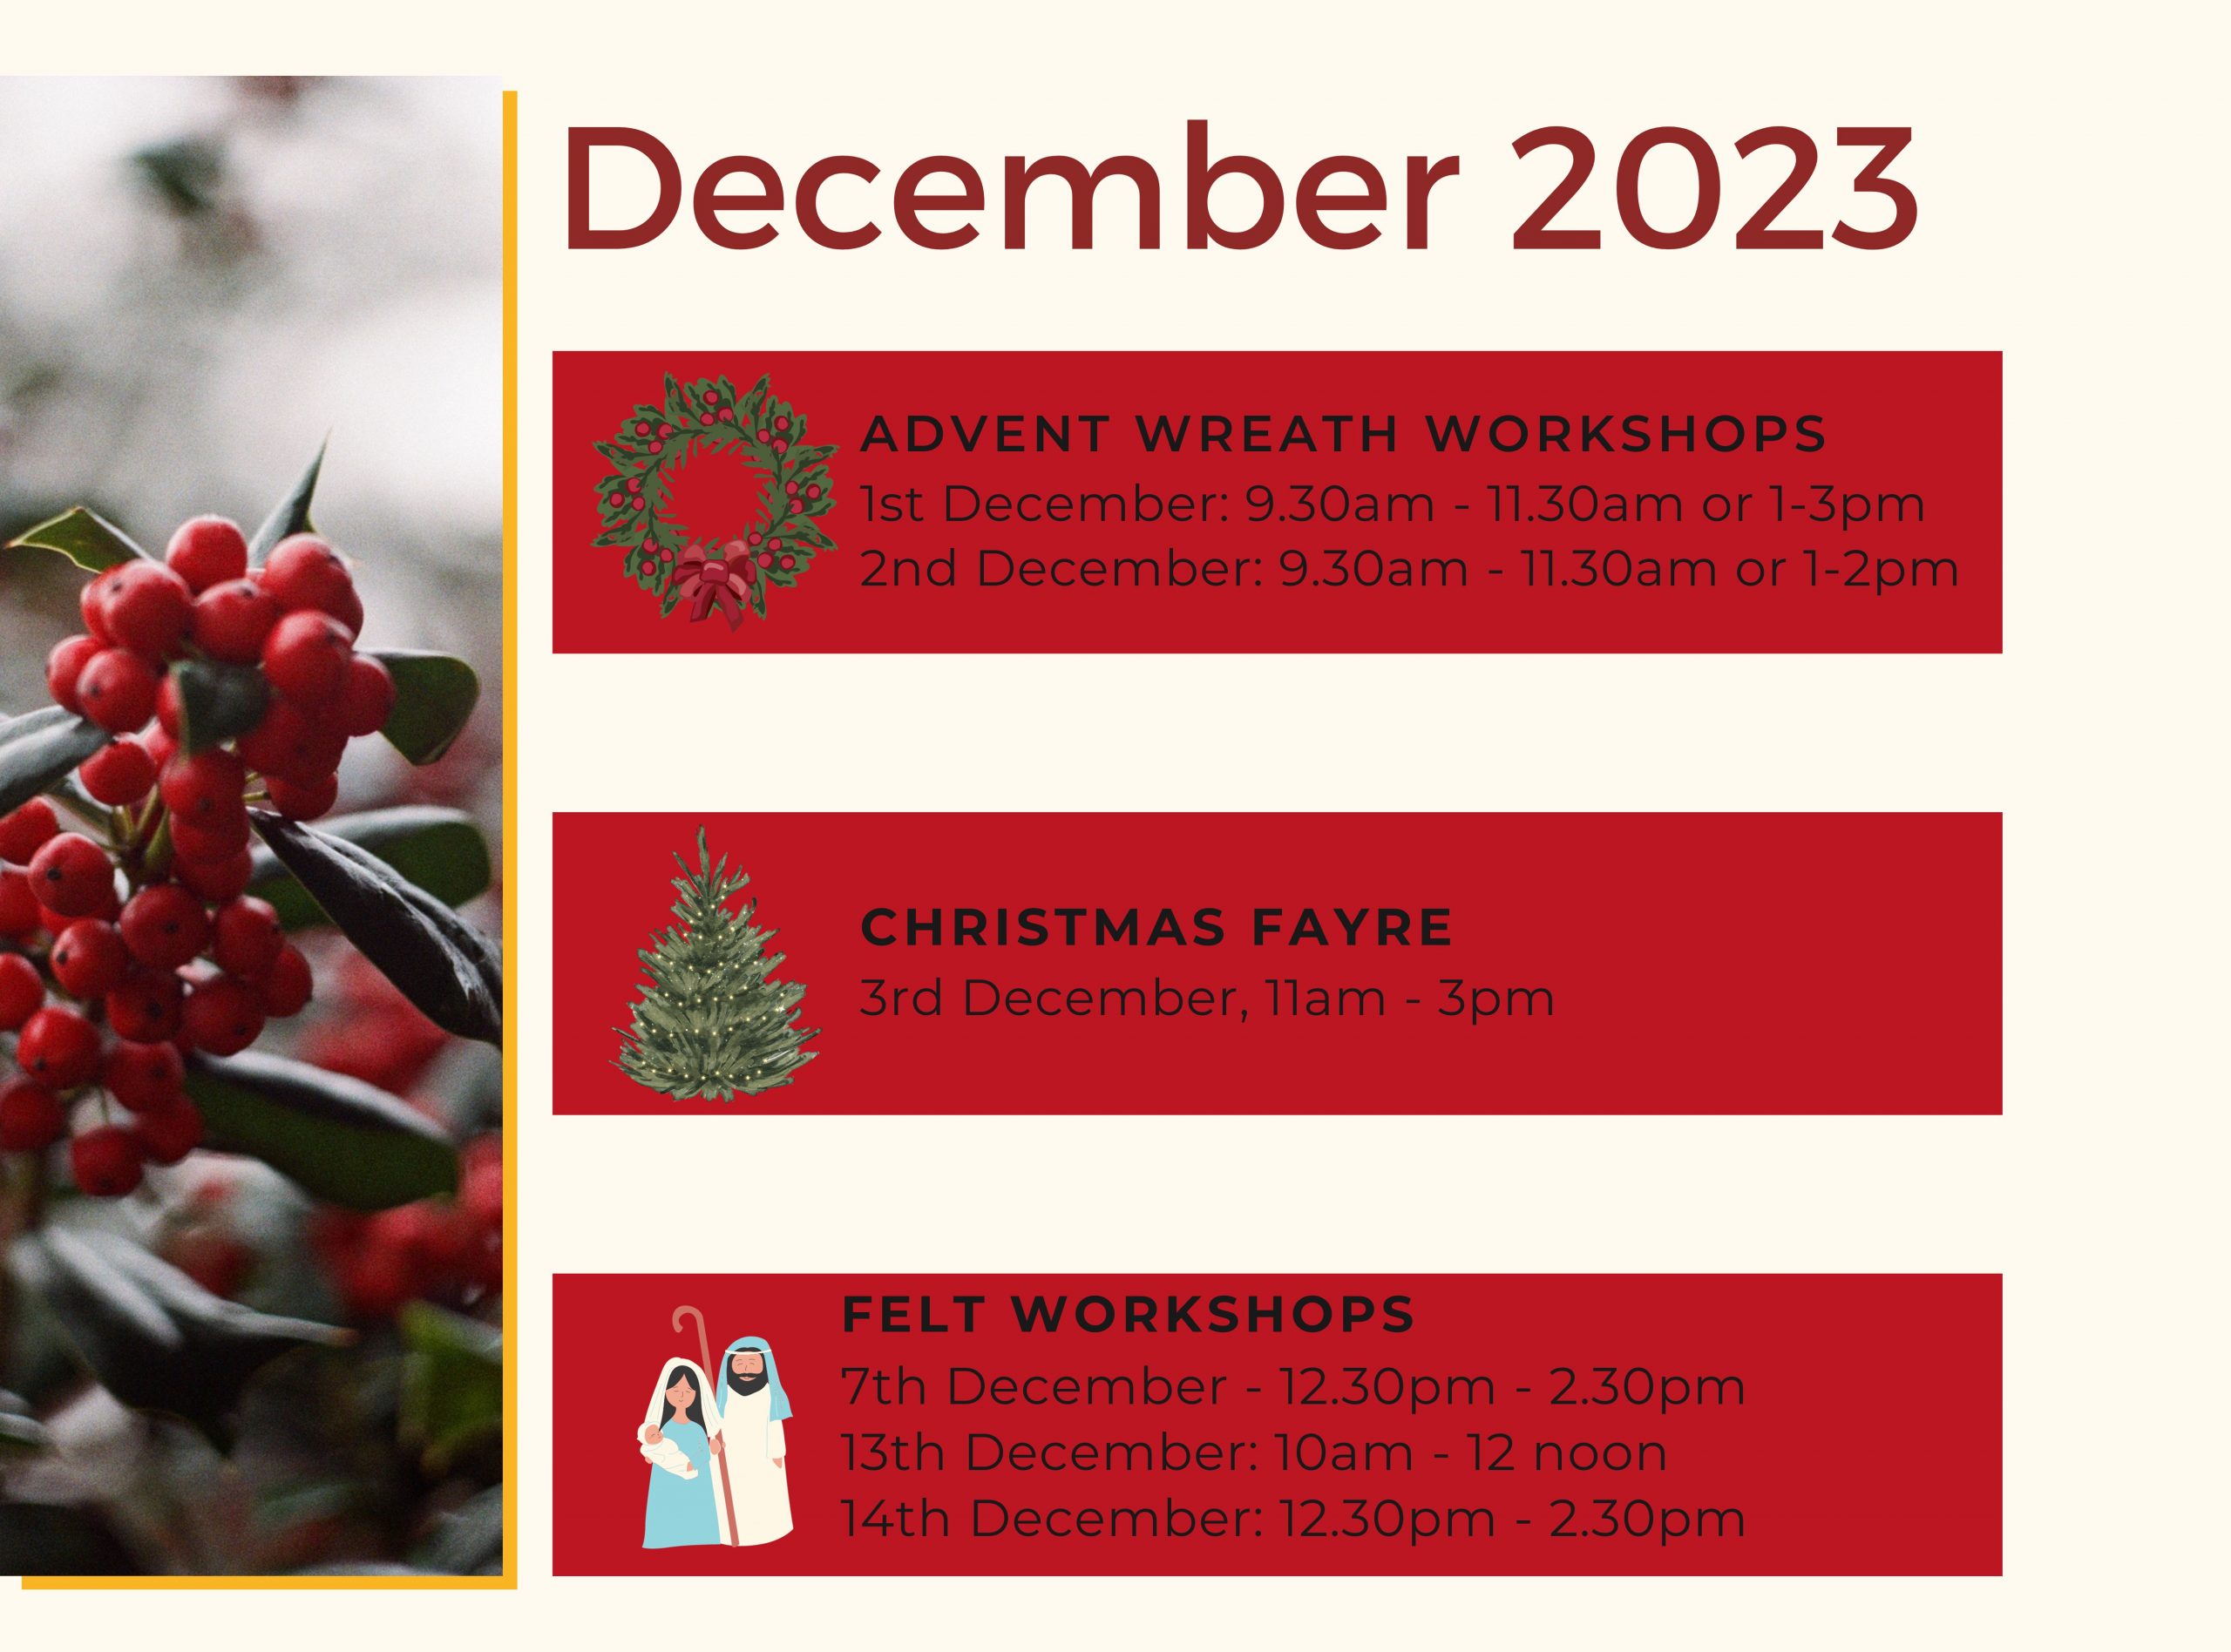 Photo of festive plant with the details: 1st December: 9.30am - 11.30am or 1-3pm 2nd December: 9.30am - 11.30am or 1-2pm, Christmas Fayre, 3rd December, 11am - 3pm; Felt Workshops: 7th December - 12.30pm - 2.30pm 13th December: 10am - 12 noon 14th December: 12.30pm - 2.30pm